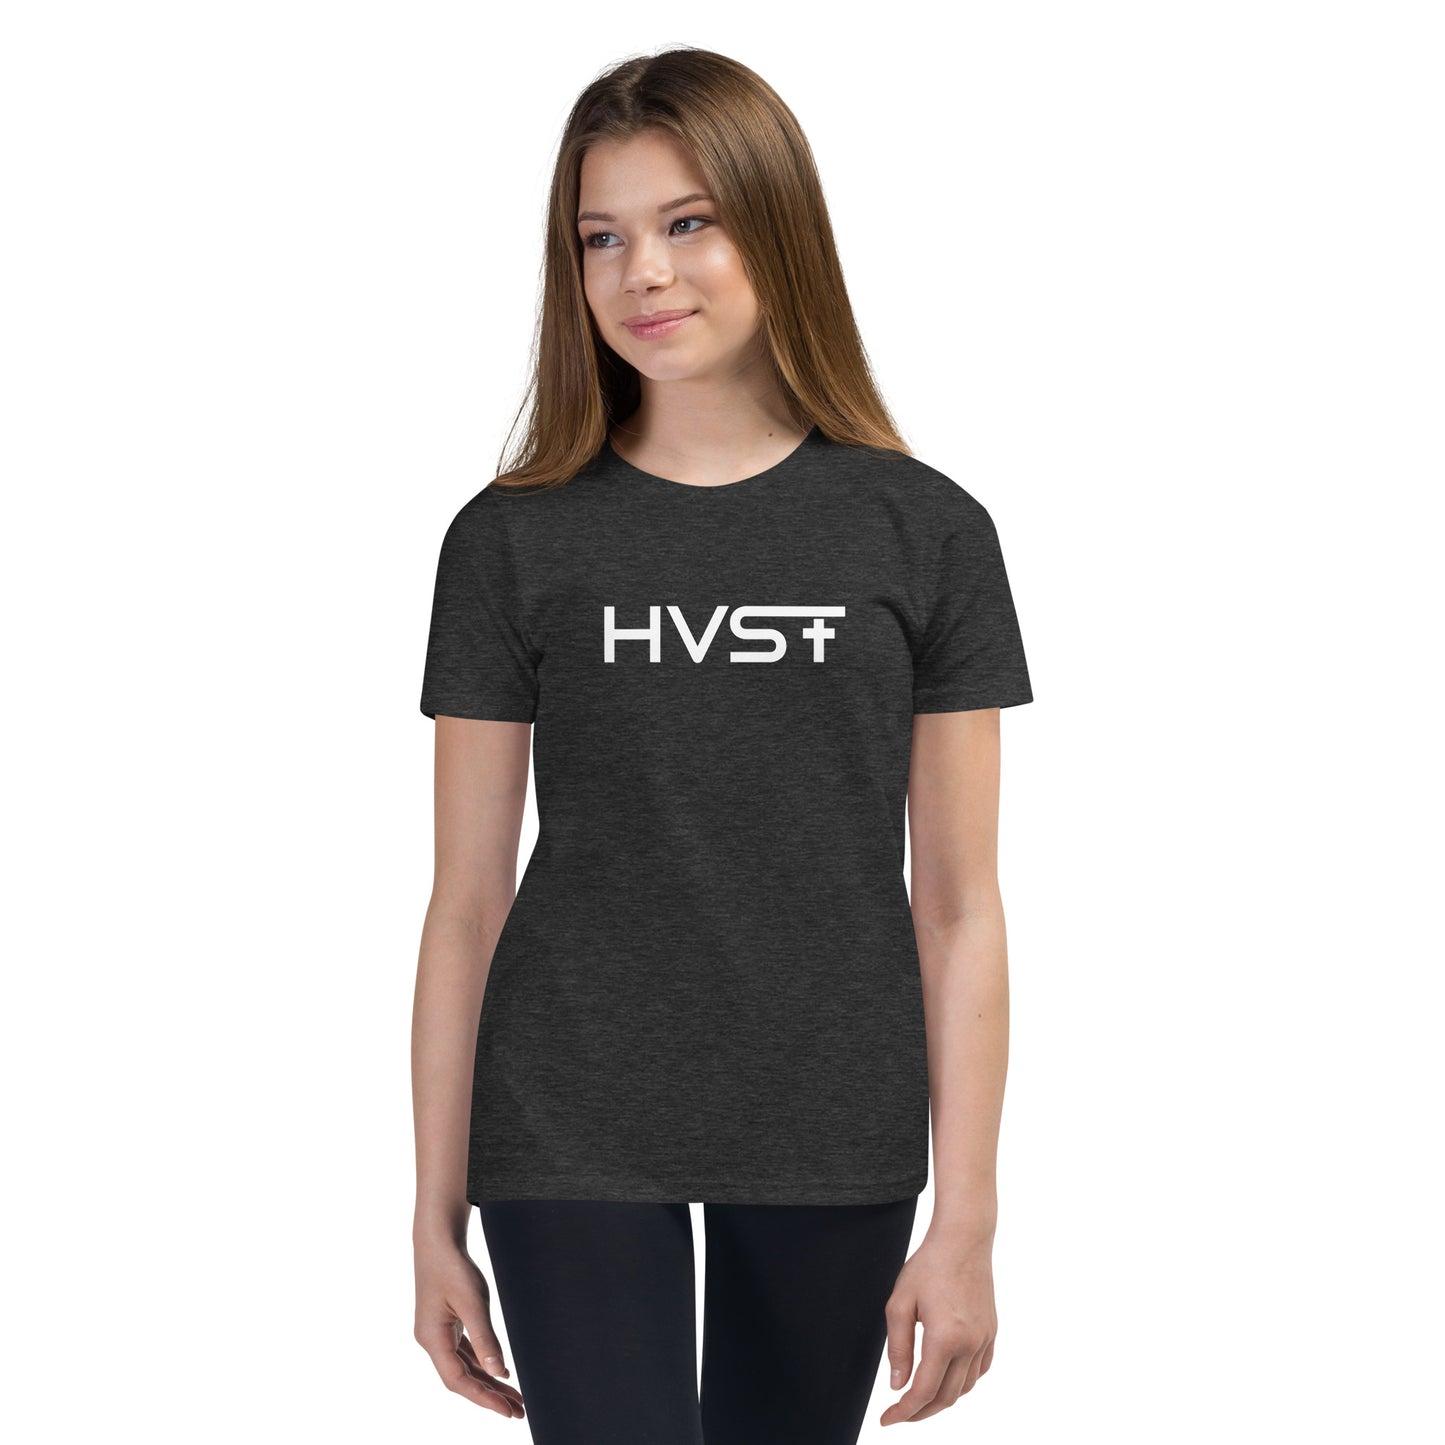 HVST Youth Classic Tee